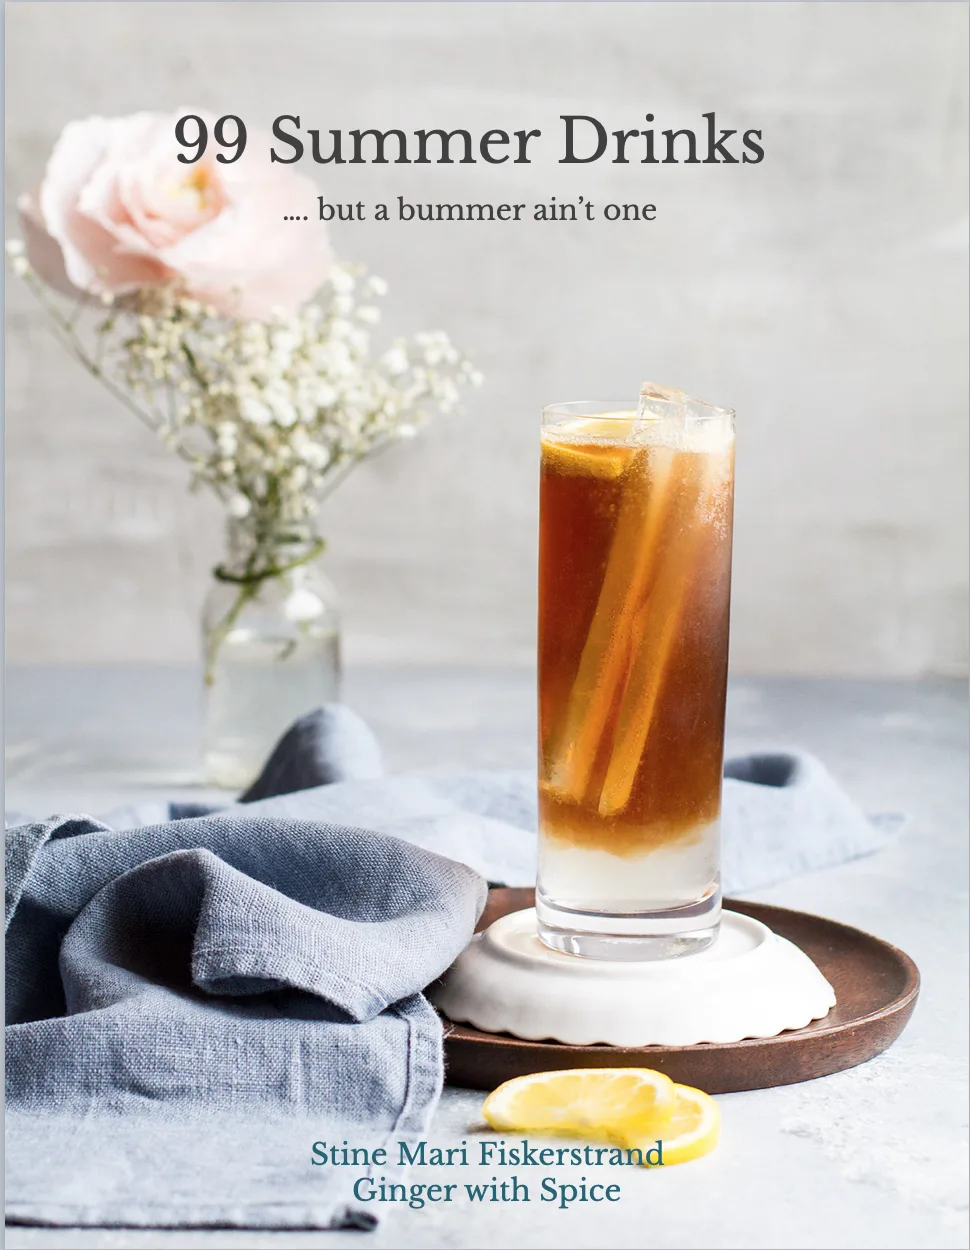 Cover page of '99 Summer Drinks' cookbook, image of a Long Island Iced Tea.